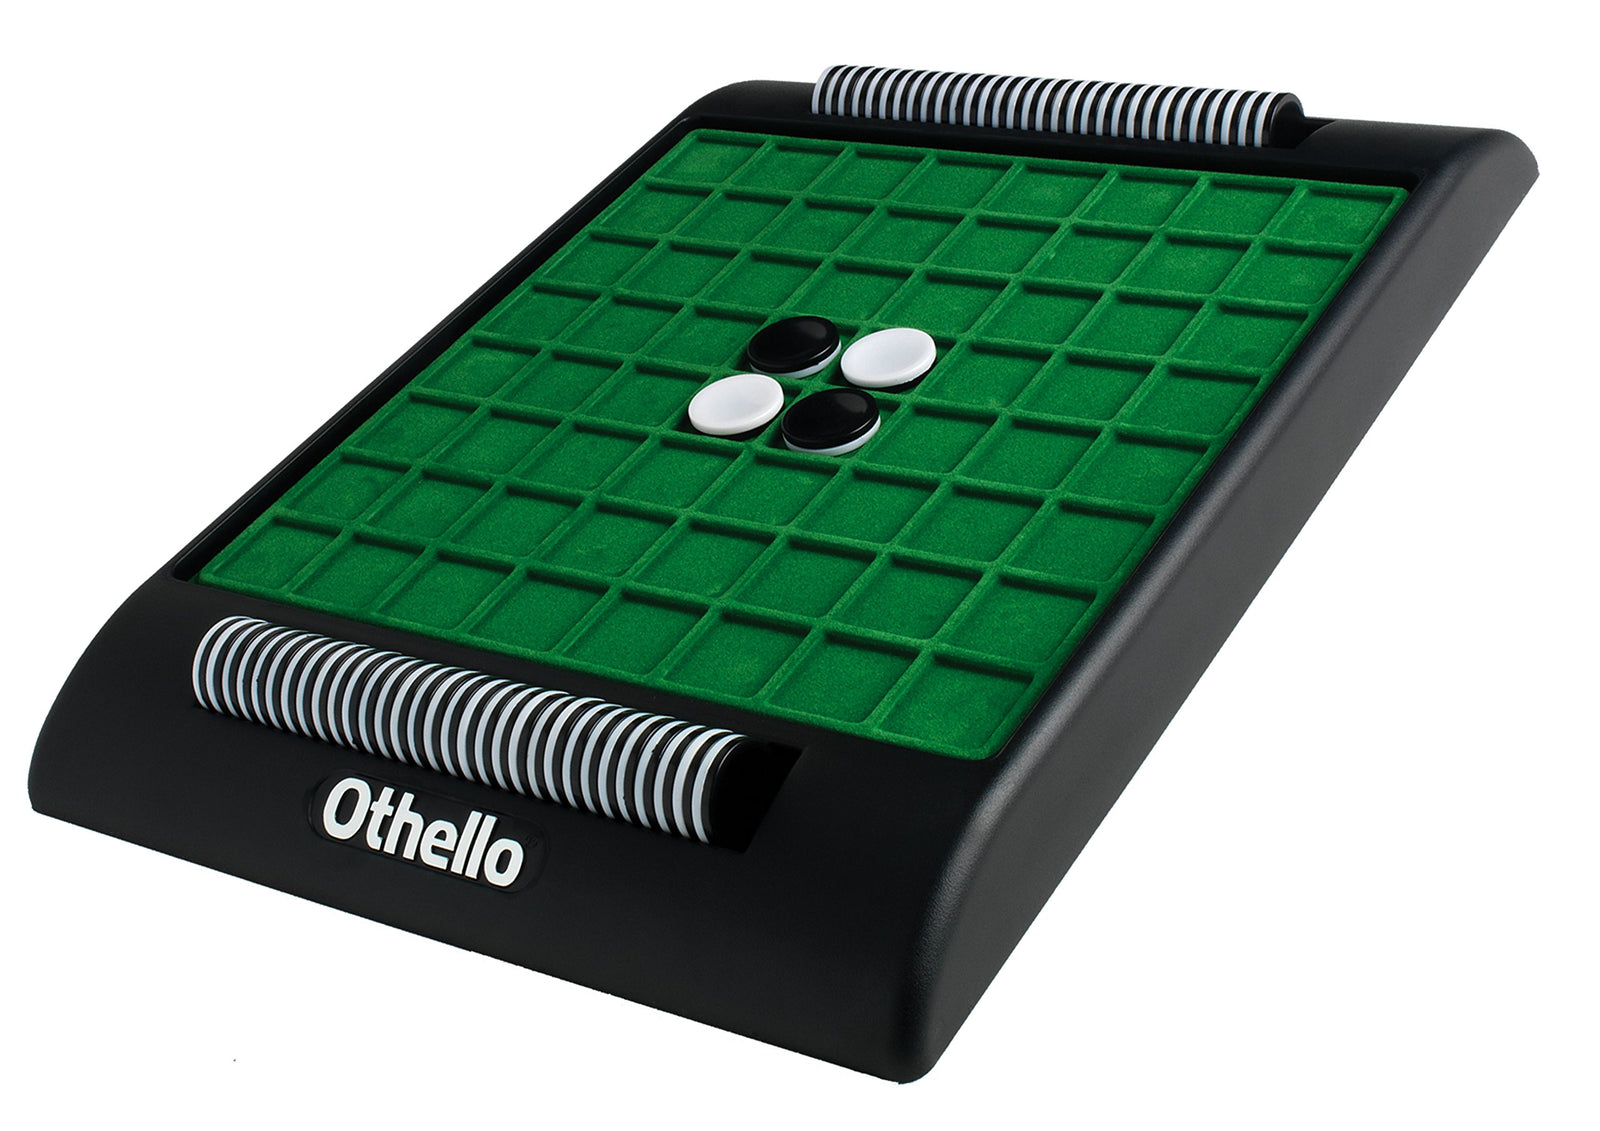 Othello - The Classic Board Game of Strategy for Adults, Families, and Kids Age7 and up